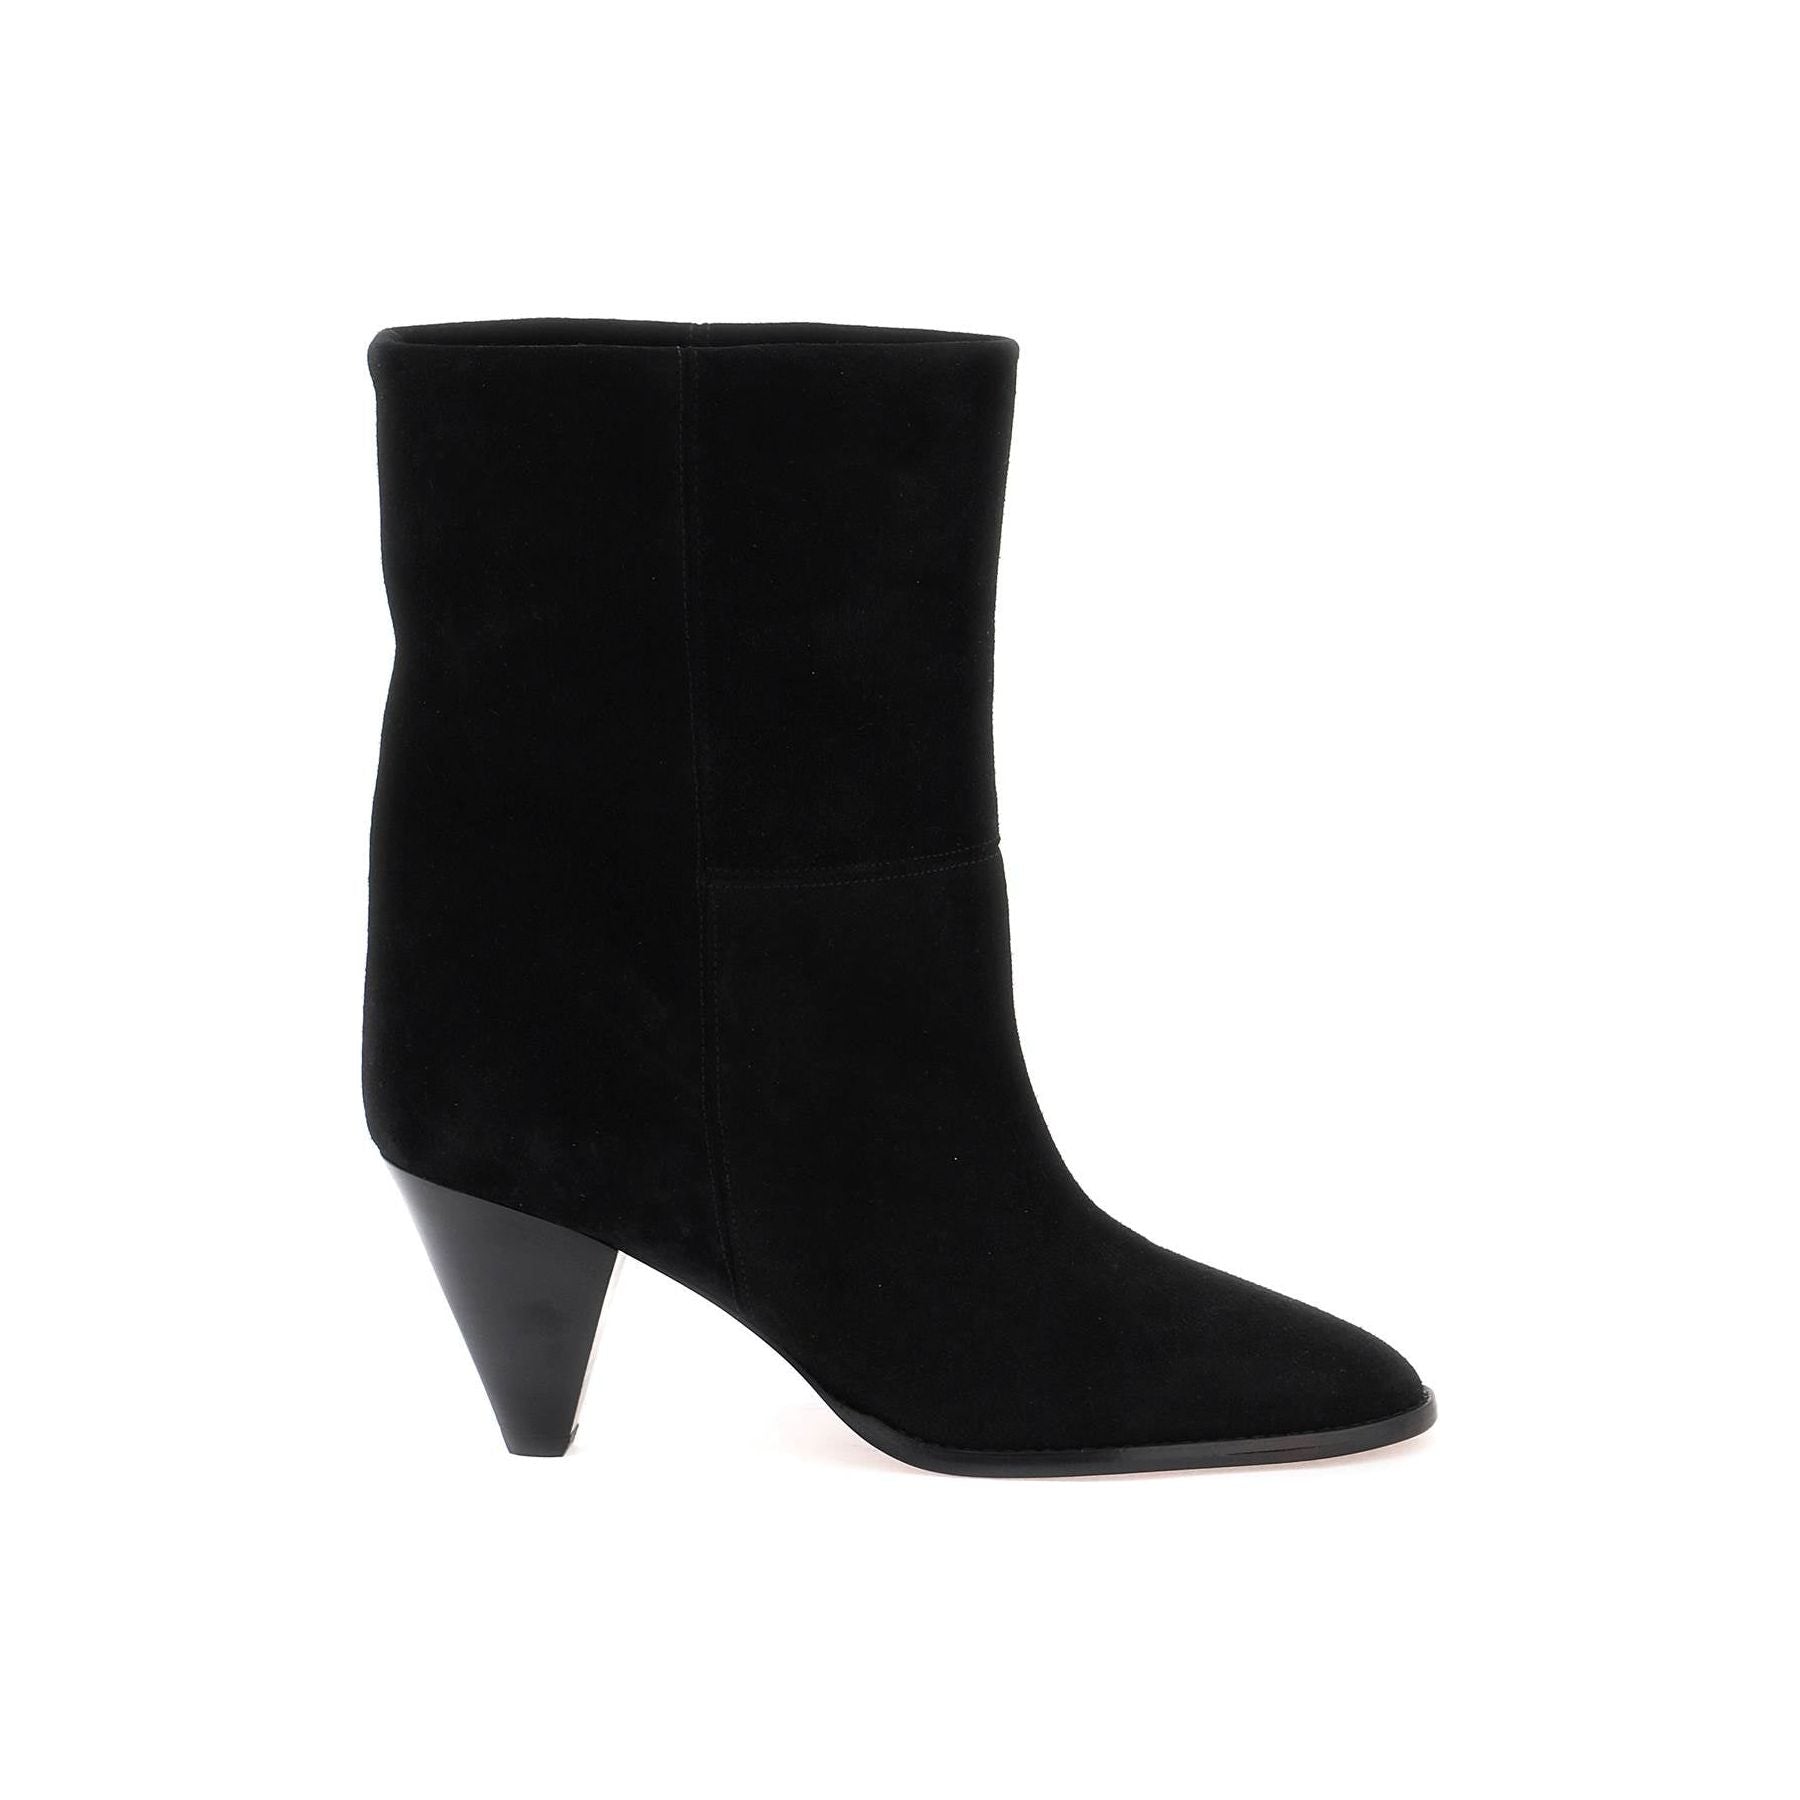 'Rouxa' Ankle Boots